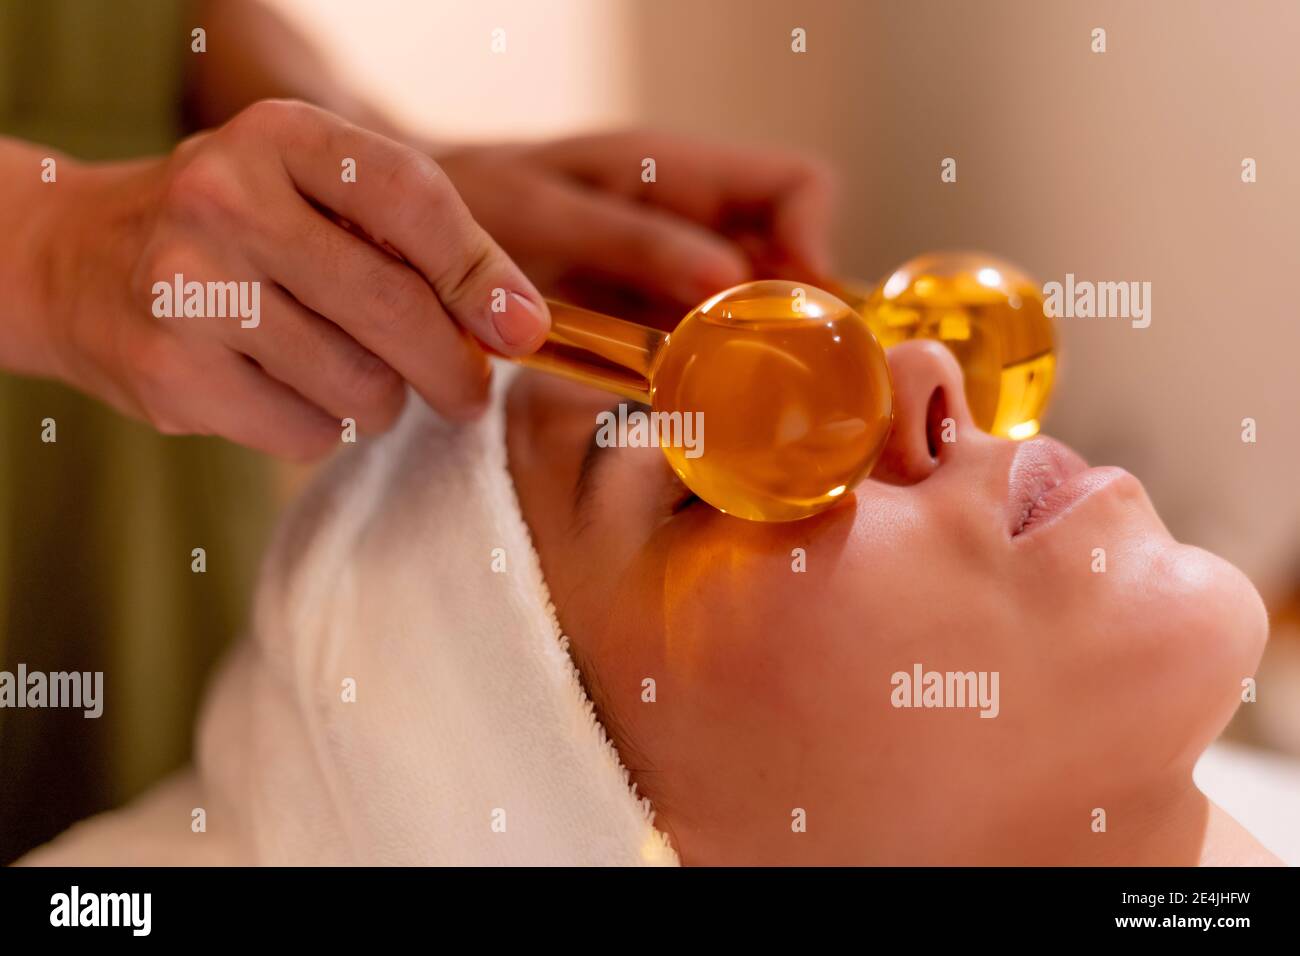 Beautician holding glass globes on female customer's face during spa treatment Stock Photo